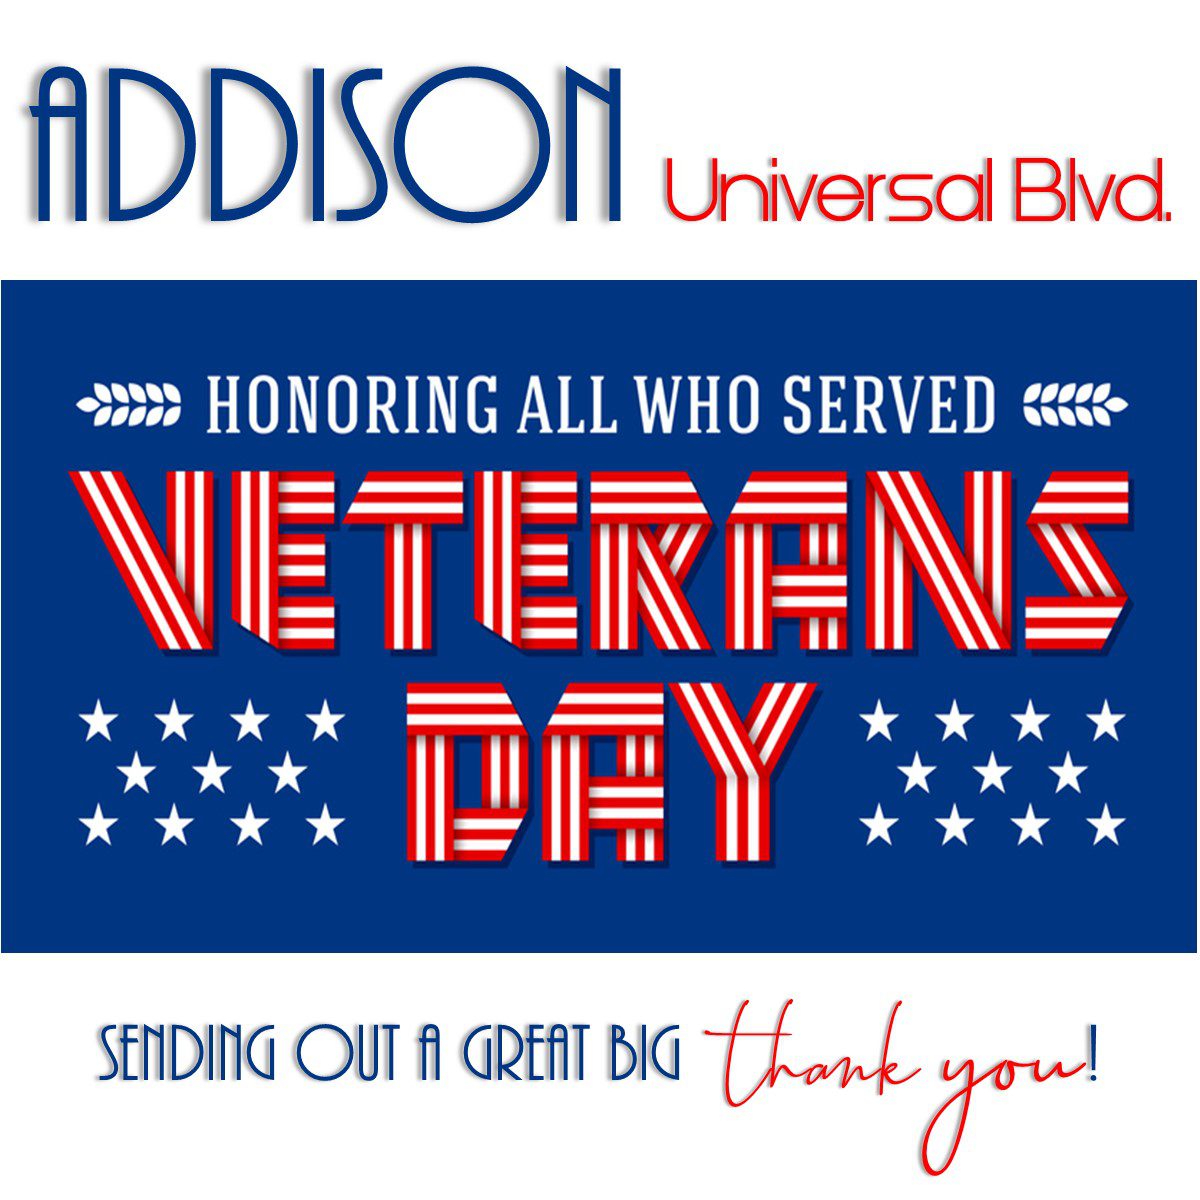 Addison at Universal Boulevard Honoring all who served Veterans Day Sending out a great big thank you!